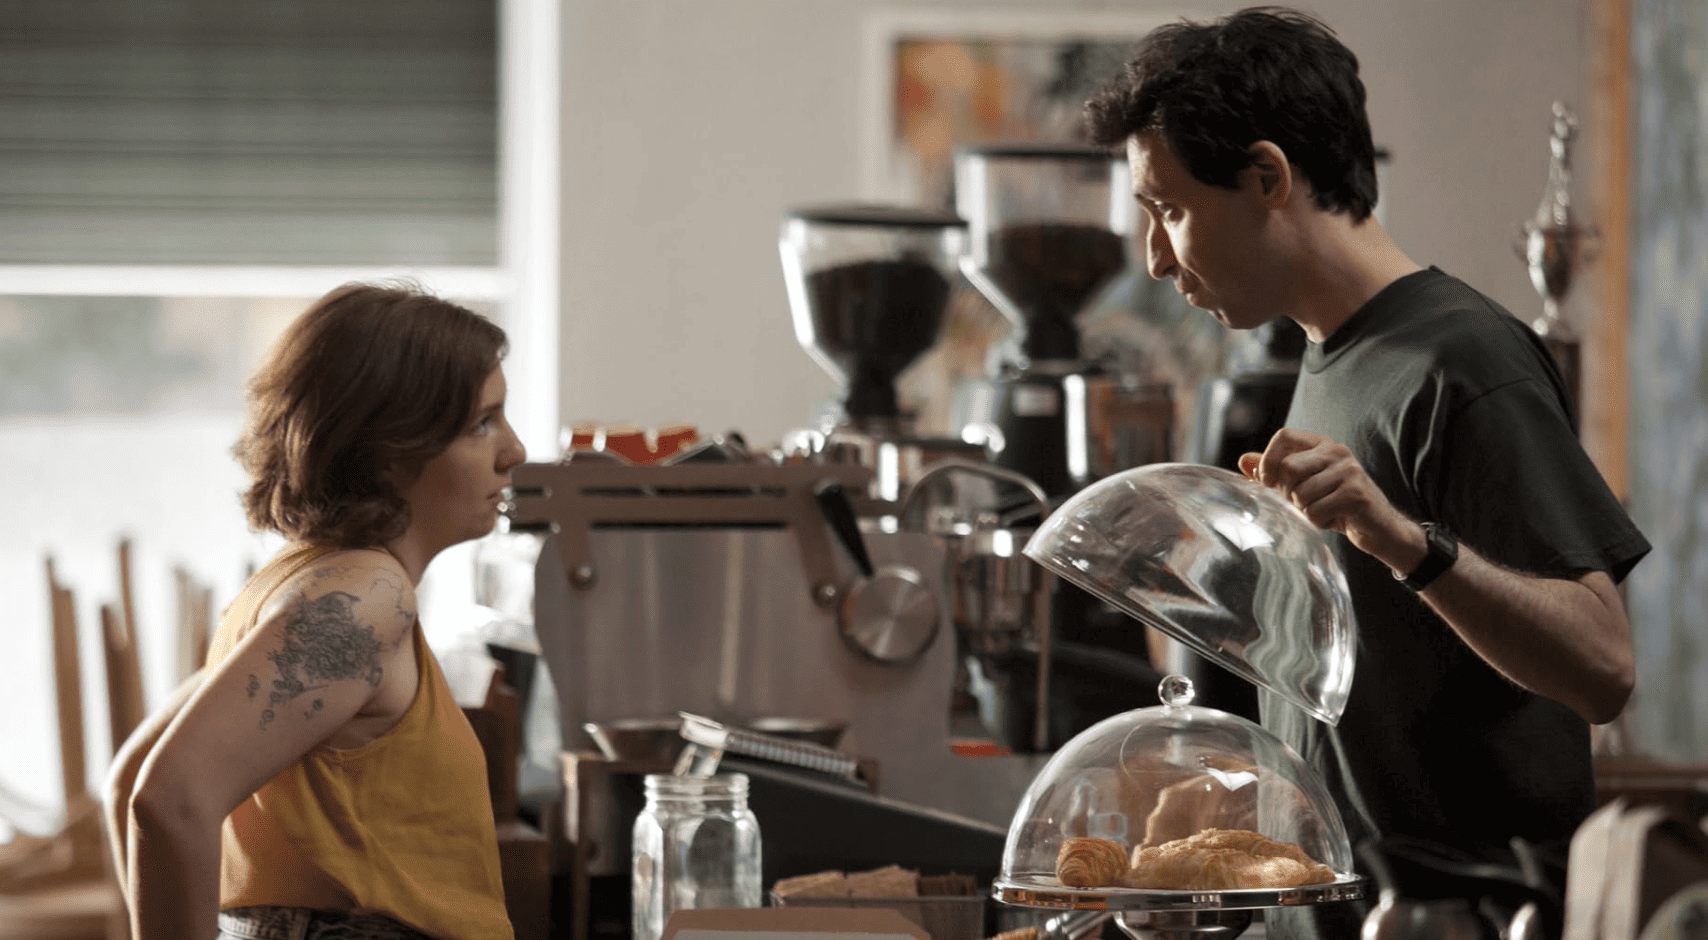 Hannah and Ray are standing opposite each other while working at his cafe and staring lovingly into each other’s eyes in this image from Apatow Productions